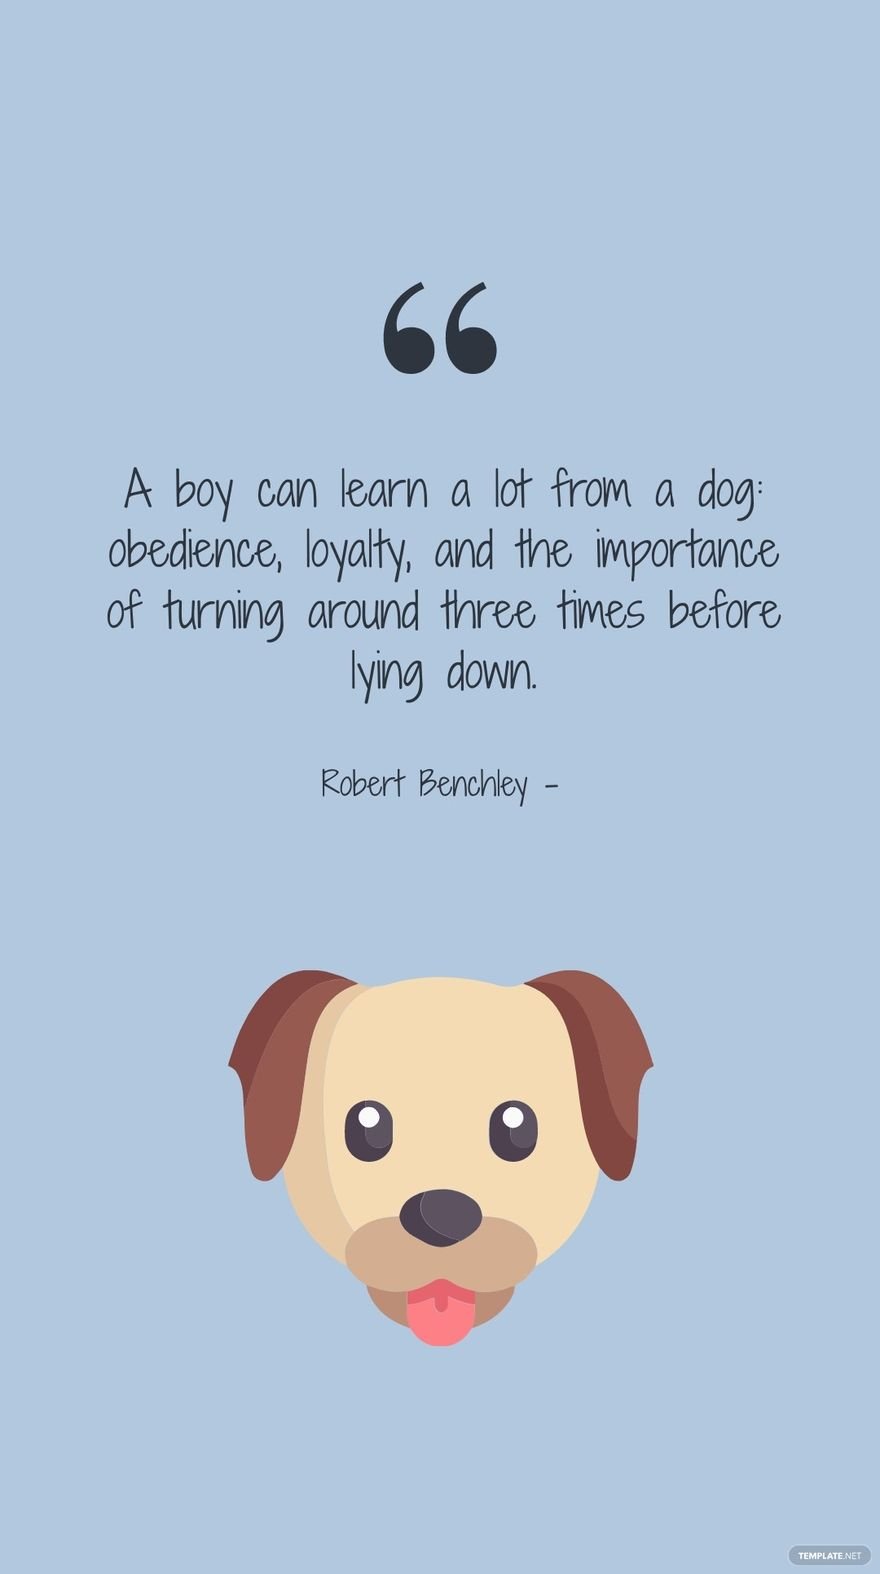 Robert Benchley - A boy can learn a lot from a dog: obedience, loyalty, and the importance of turning around three times before lying down. in JPG